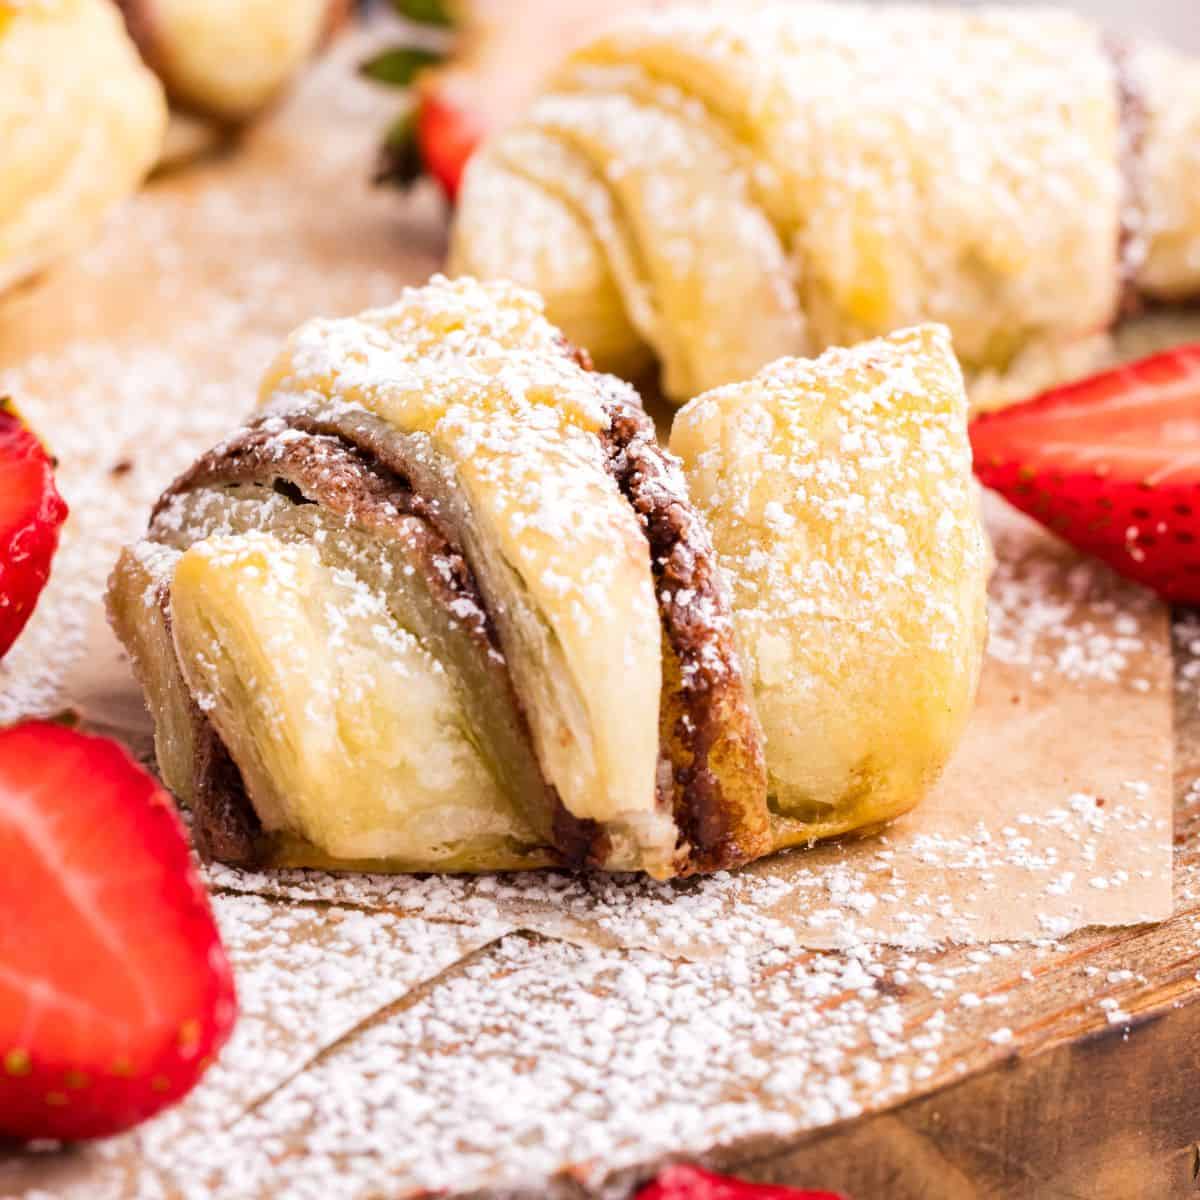 Sugar Free Chocolate Filled Croissants, a simple four ingredient breakfast or brunch recipe made with puff pastry and no added sugar.